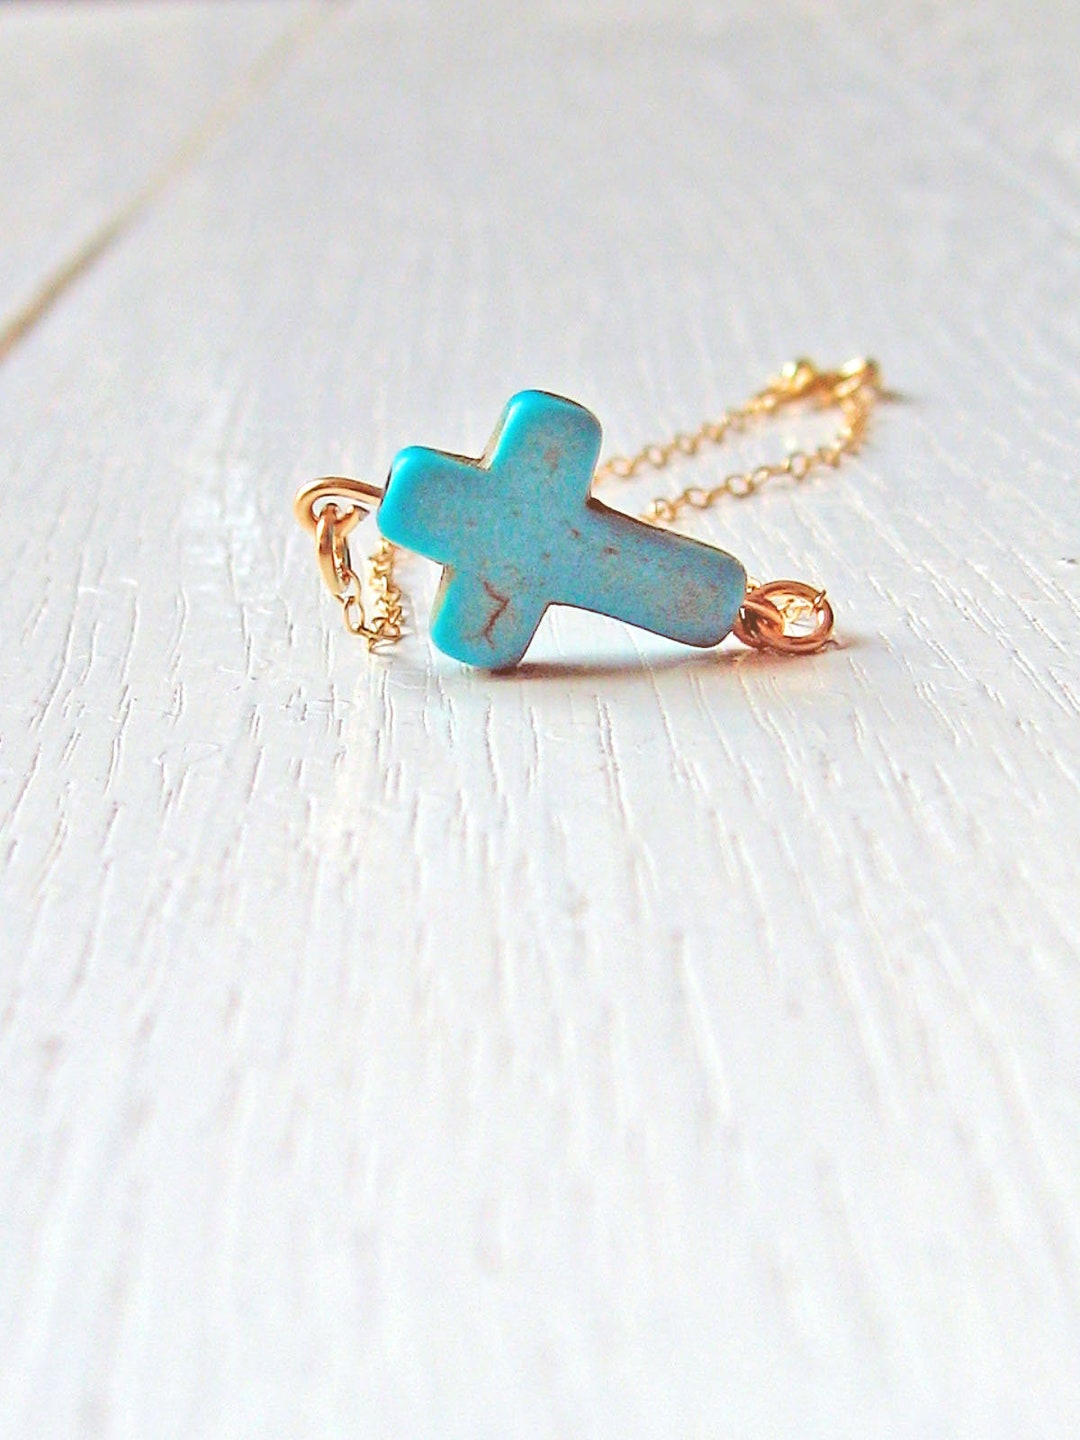 Baby Cross Anklet 14k Gold Fill or Sterling Silver Turquoise - Etsy